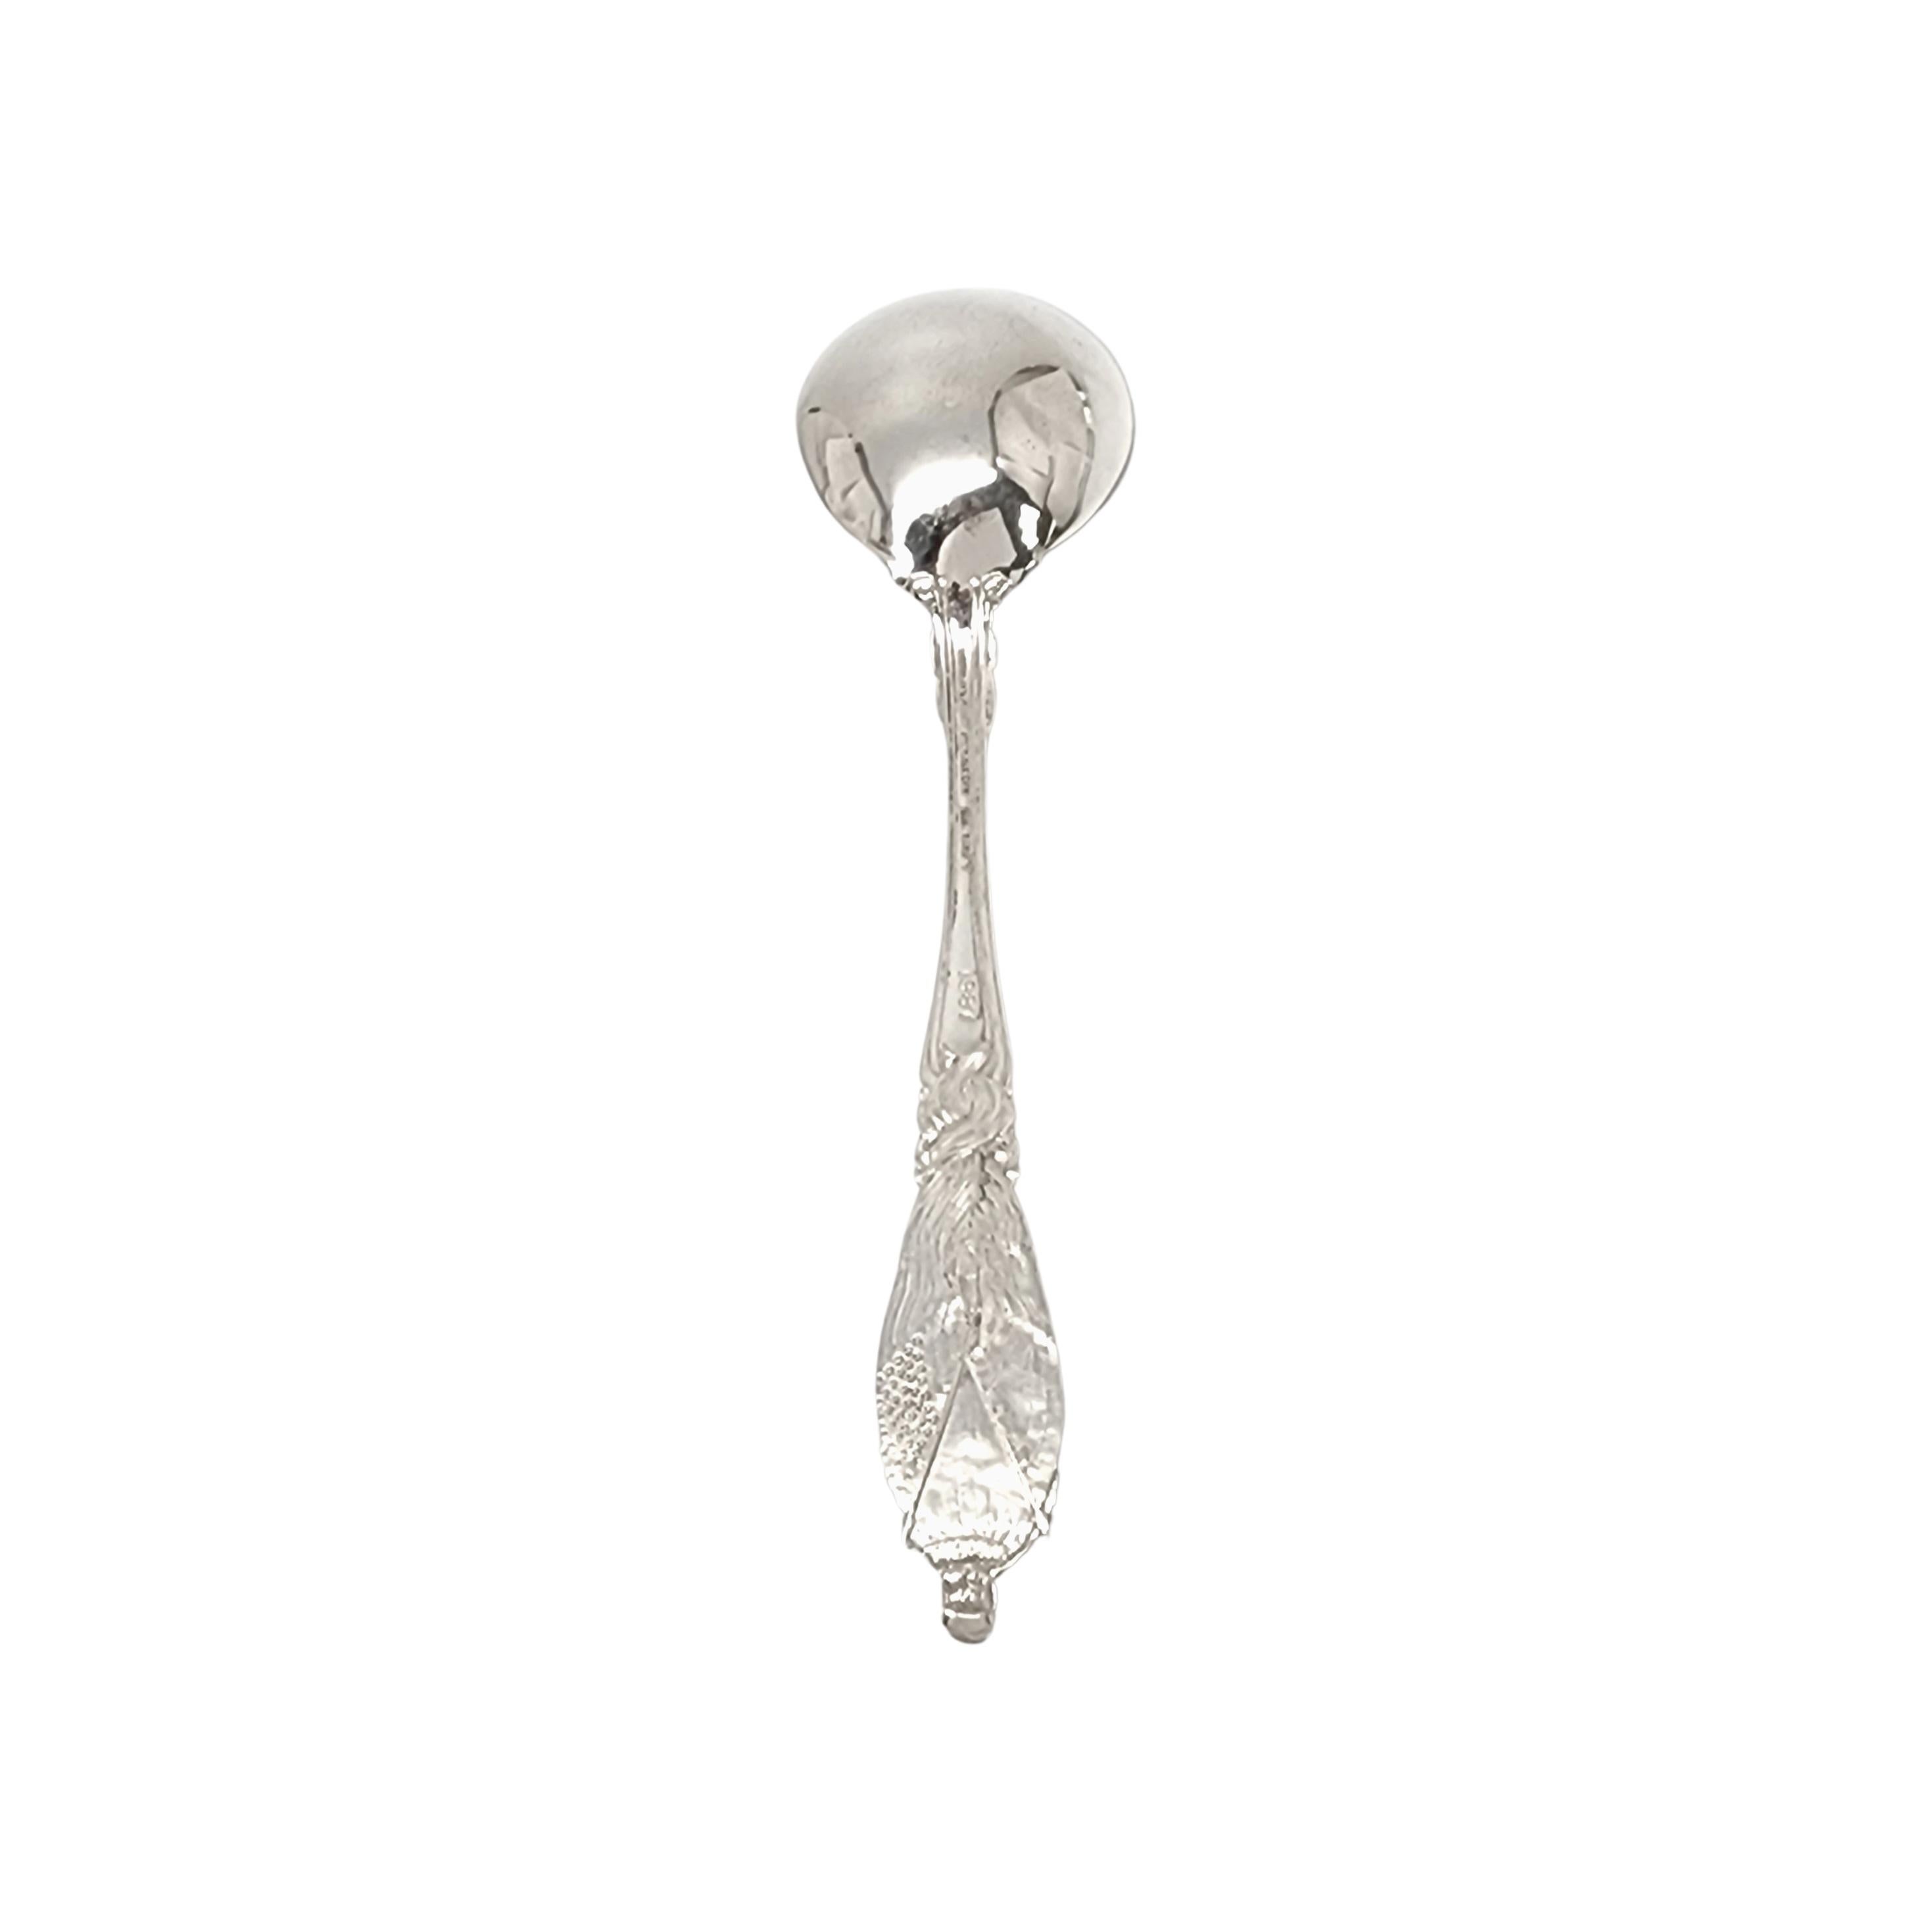 Sterling silver Christopher Columbus souvenir spoon by Tiffany & Co.

This souvenir spoon is from the 1983 Columbian Exposition, World's Fair. It features a handle topped with Christopher Columbus 1492 1893 and a bowl engraved with a globe. Does not